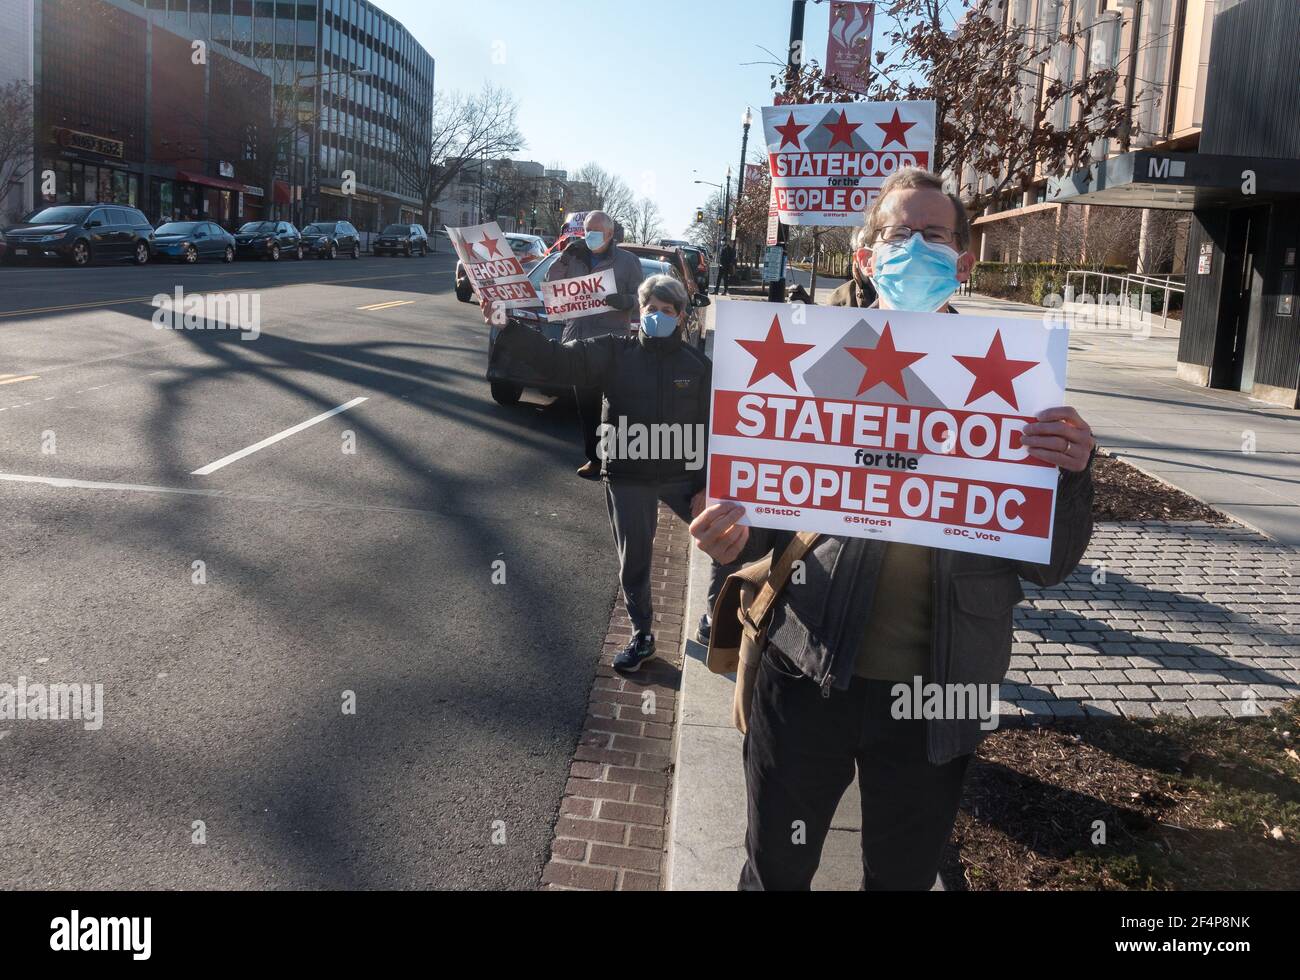 WASHINGTON, DC - MAR. 22, 2021: Residents show support for making DC the 51st state at one of several demonstrations in DC on the day the House of Representatives holds hearing on adding the District of Columbia as the 51st state, something long sought by residents of Washington who do not have voting representation in Congress. Stock Photo